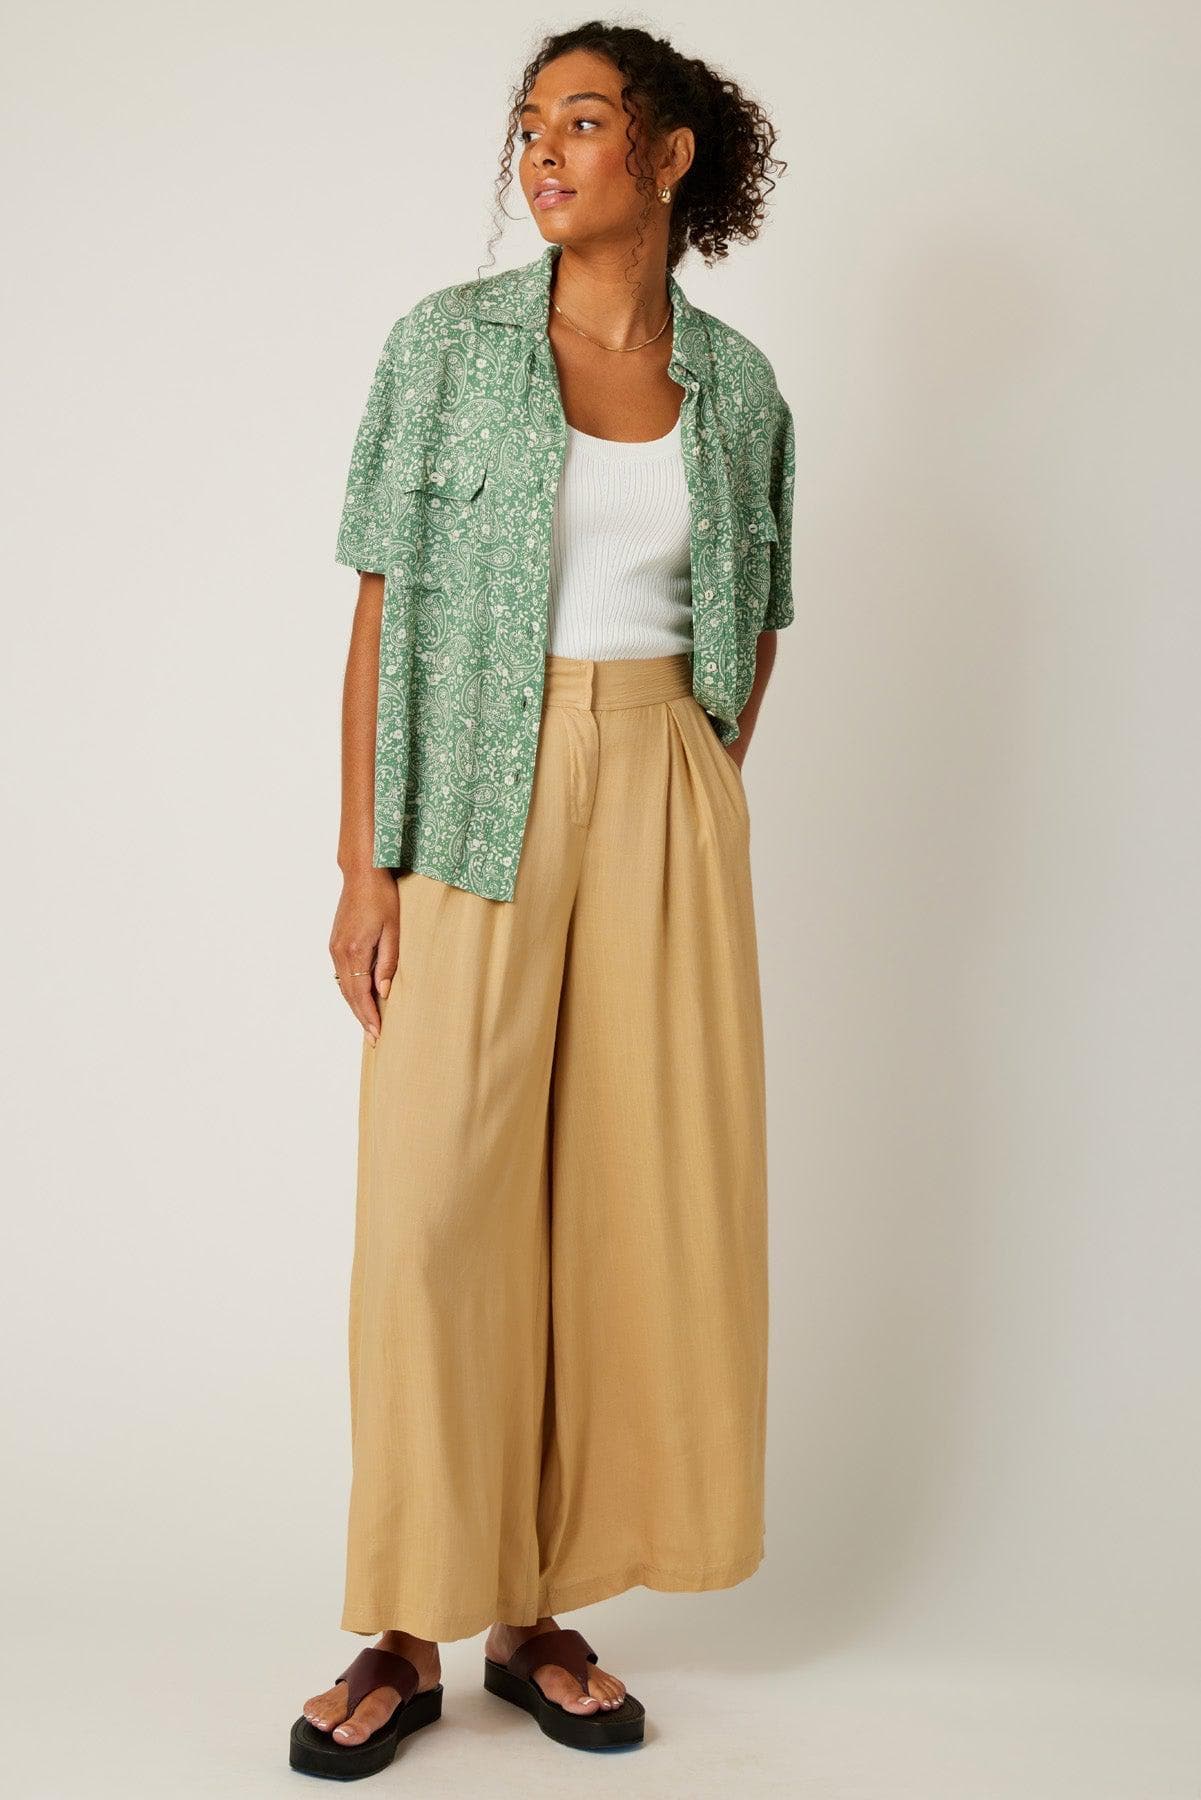 Wanderlust Trousers Pants Scout and Poppy Fashion Boutique